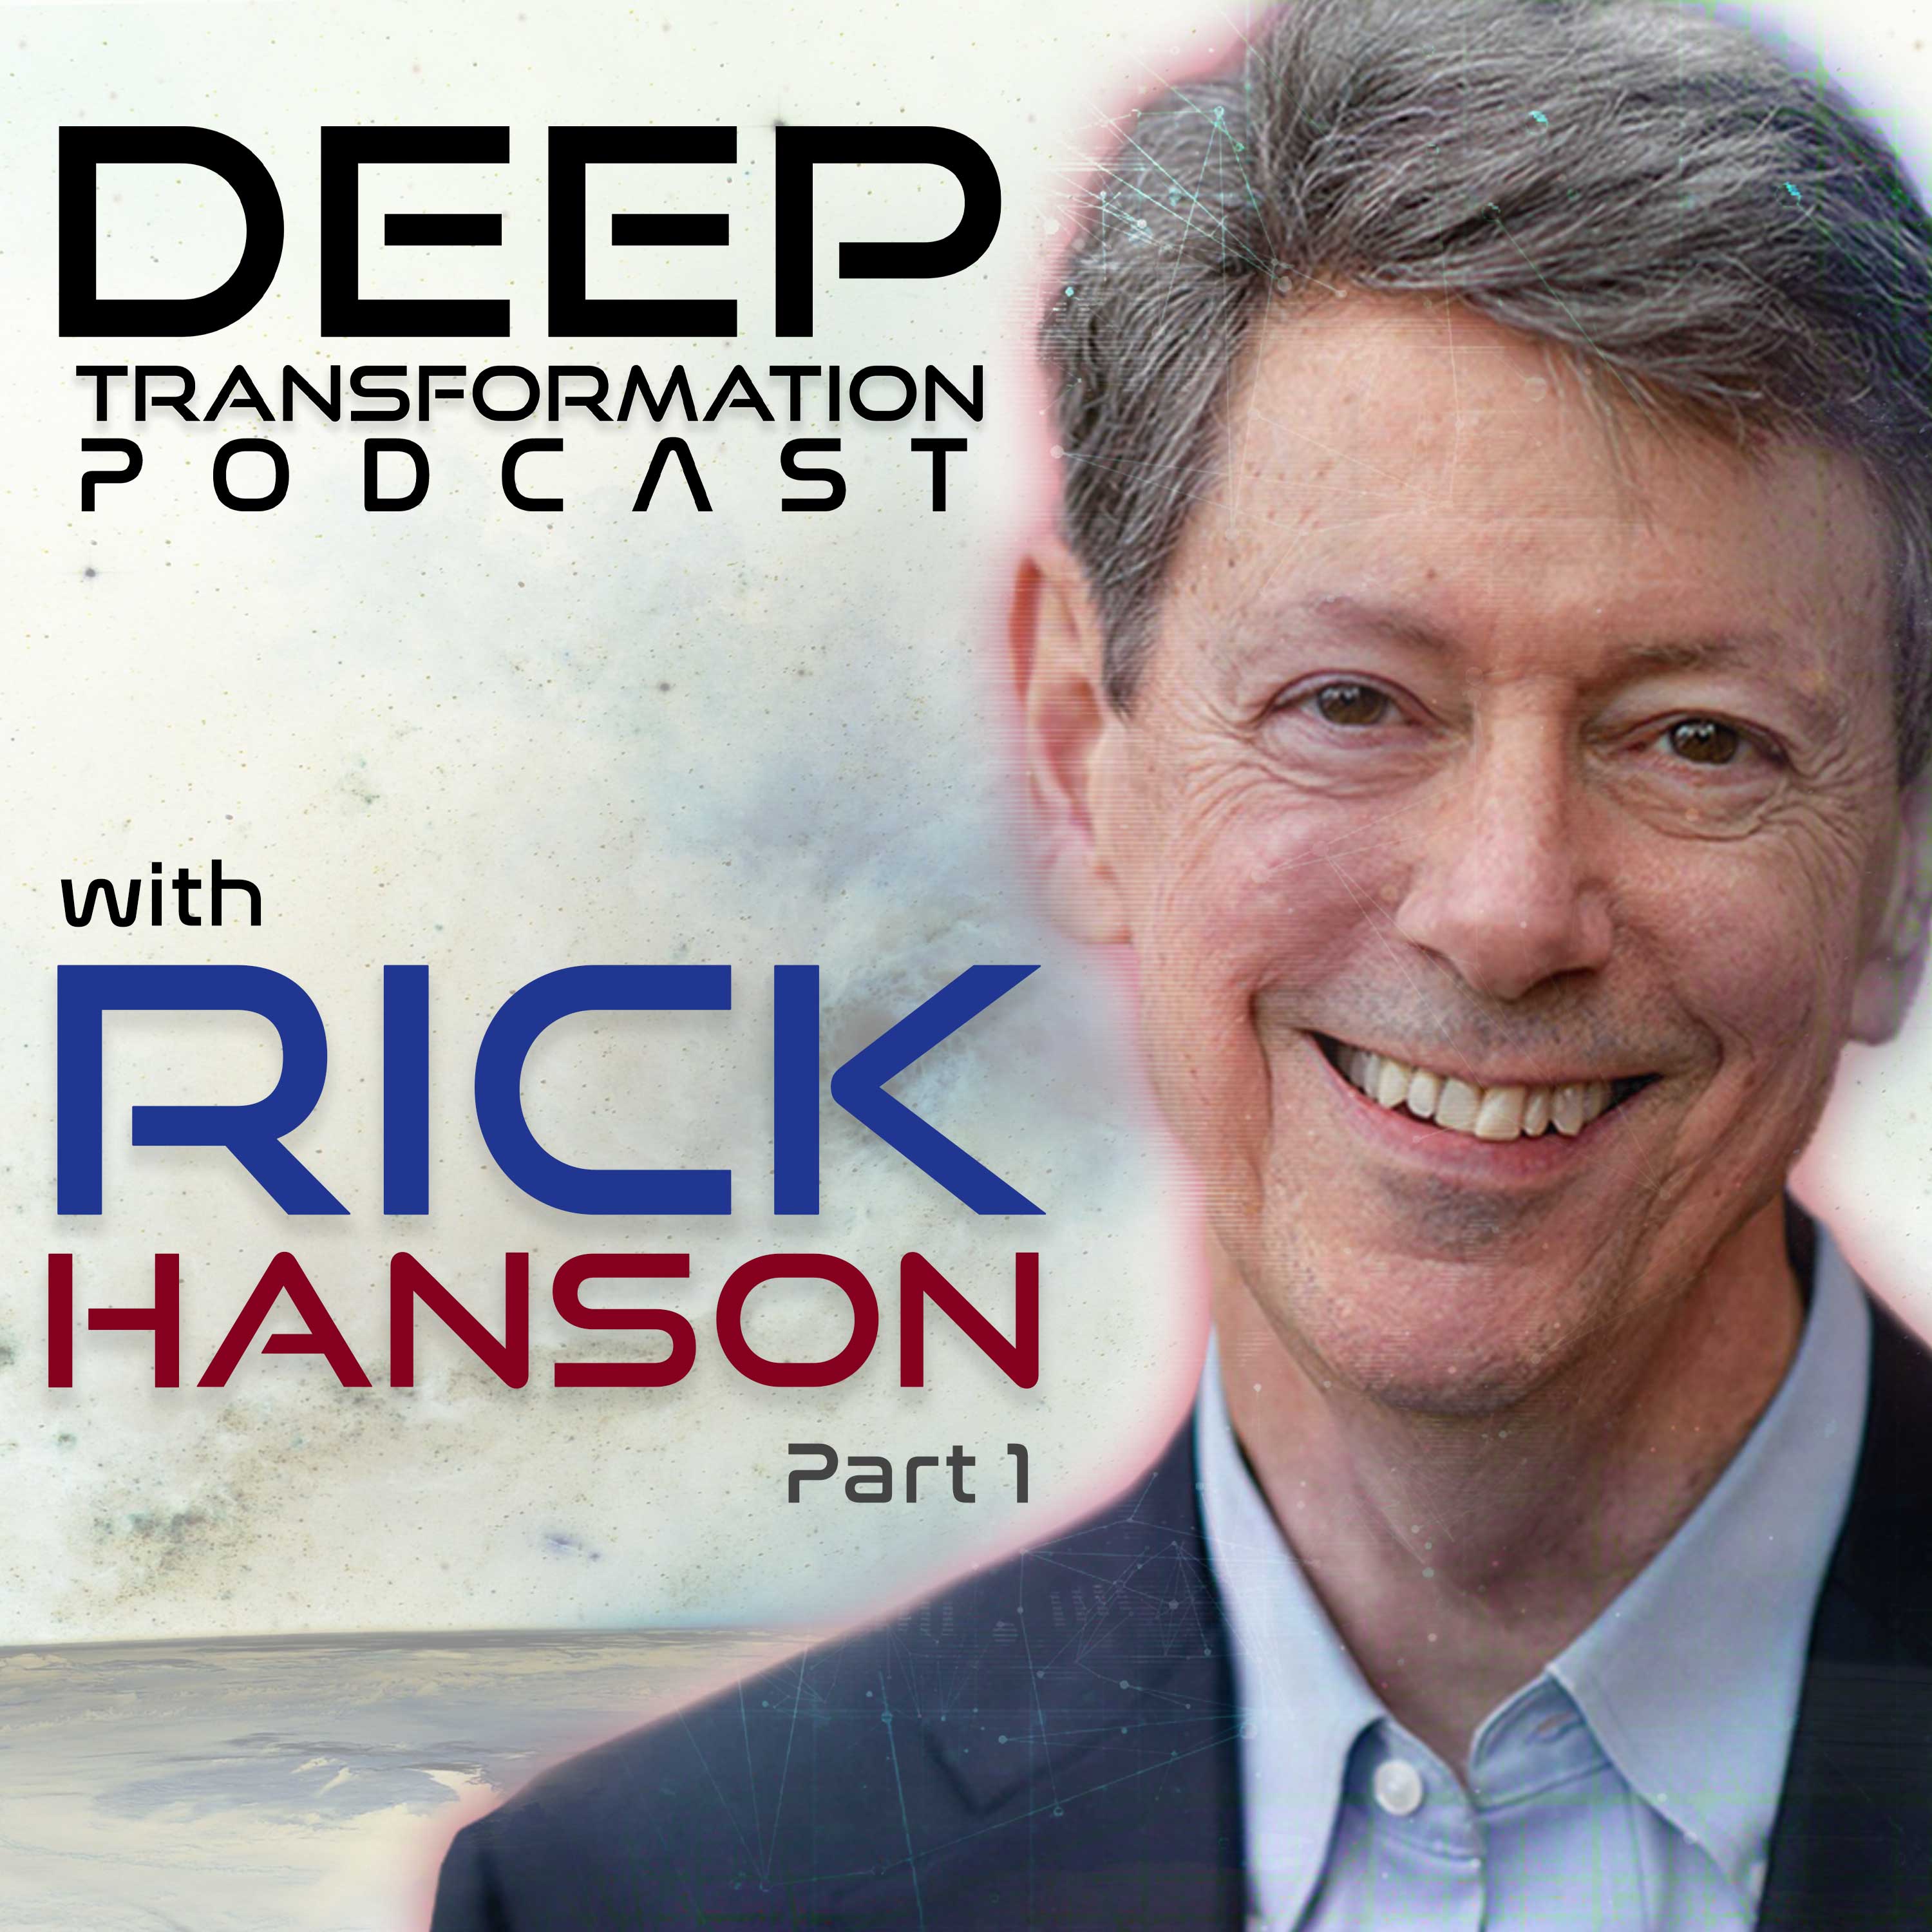 Rick Hanson (Part 1) - How We Can Hack Our Brain Using Neuroscience to  Become Happier, Healthier, More Transcendent, and Turn Altered States to  Enduring Traits - Deep Transformation Podcast